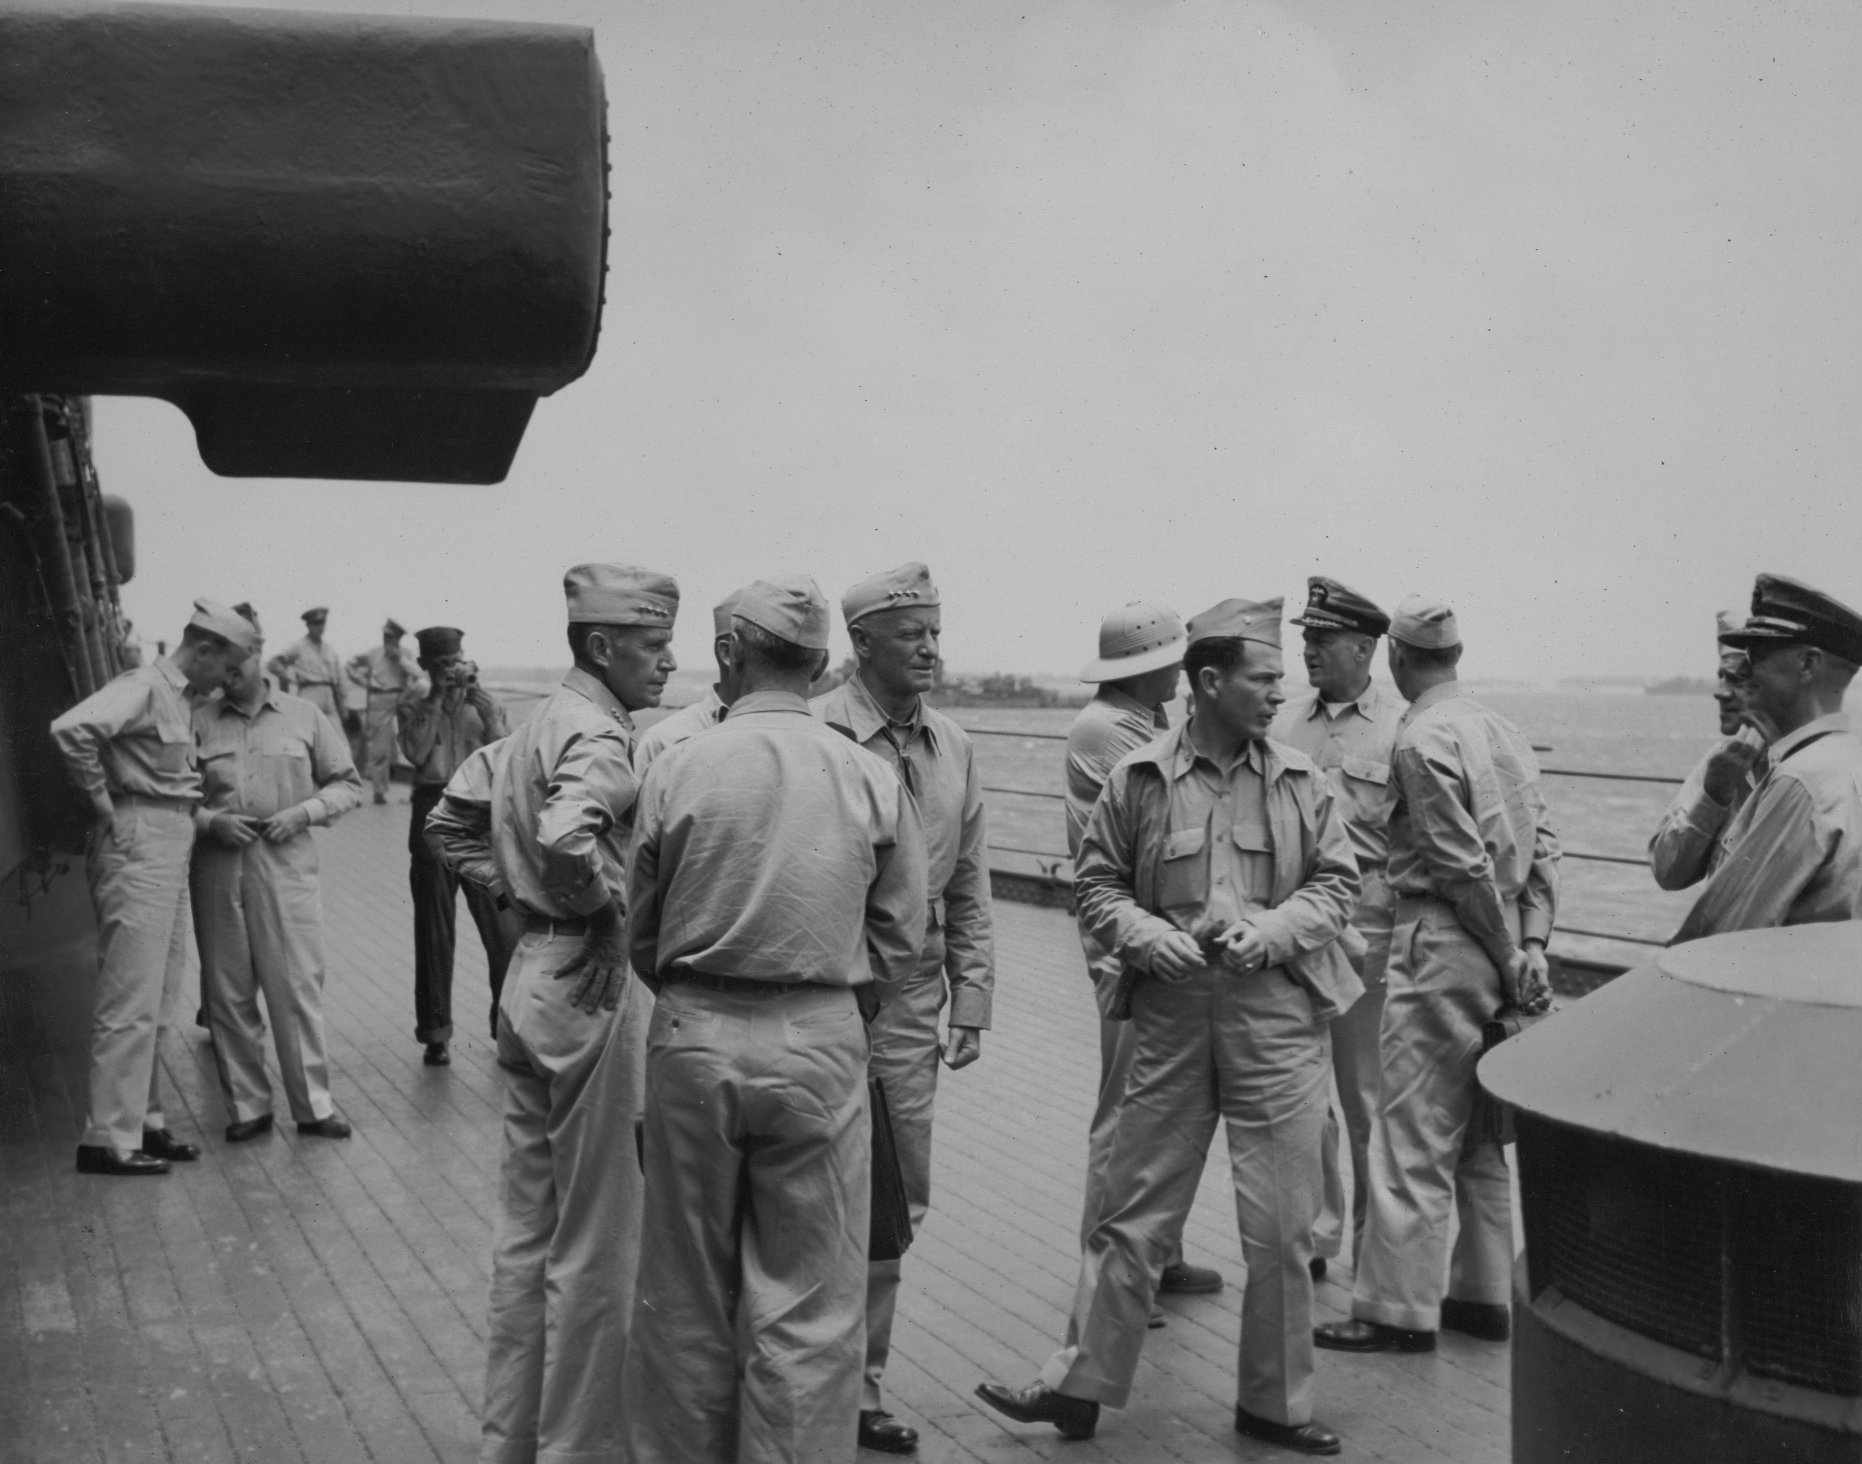 Admiral Raymond Spruance and Admiral Chester Nimitiz aboard USS New Jersey, date unknown, photo 4 of 4; note Robert Elliott in background, with camera